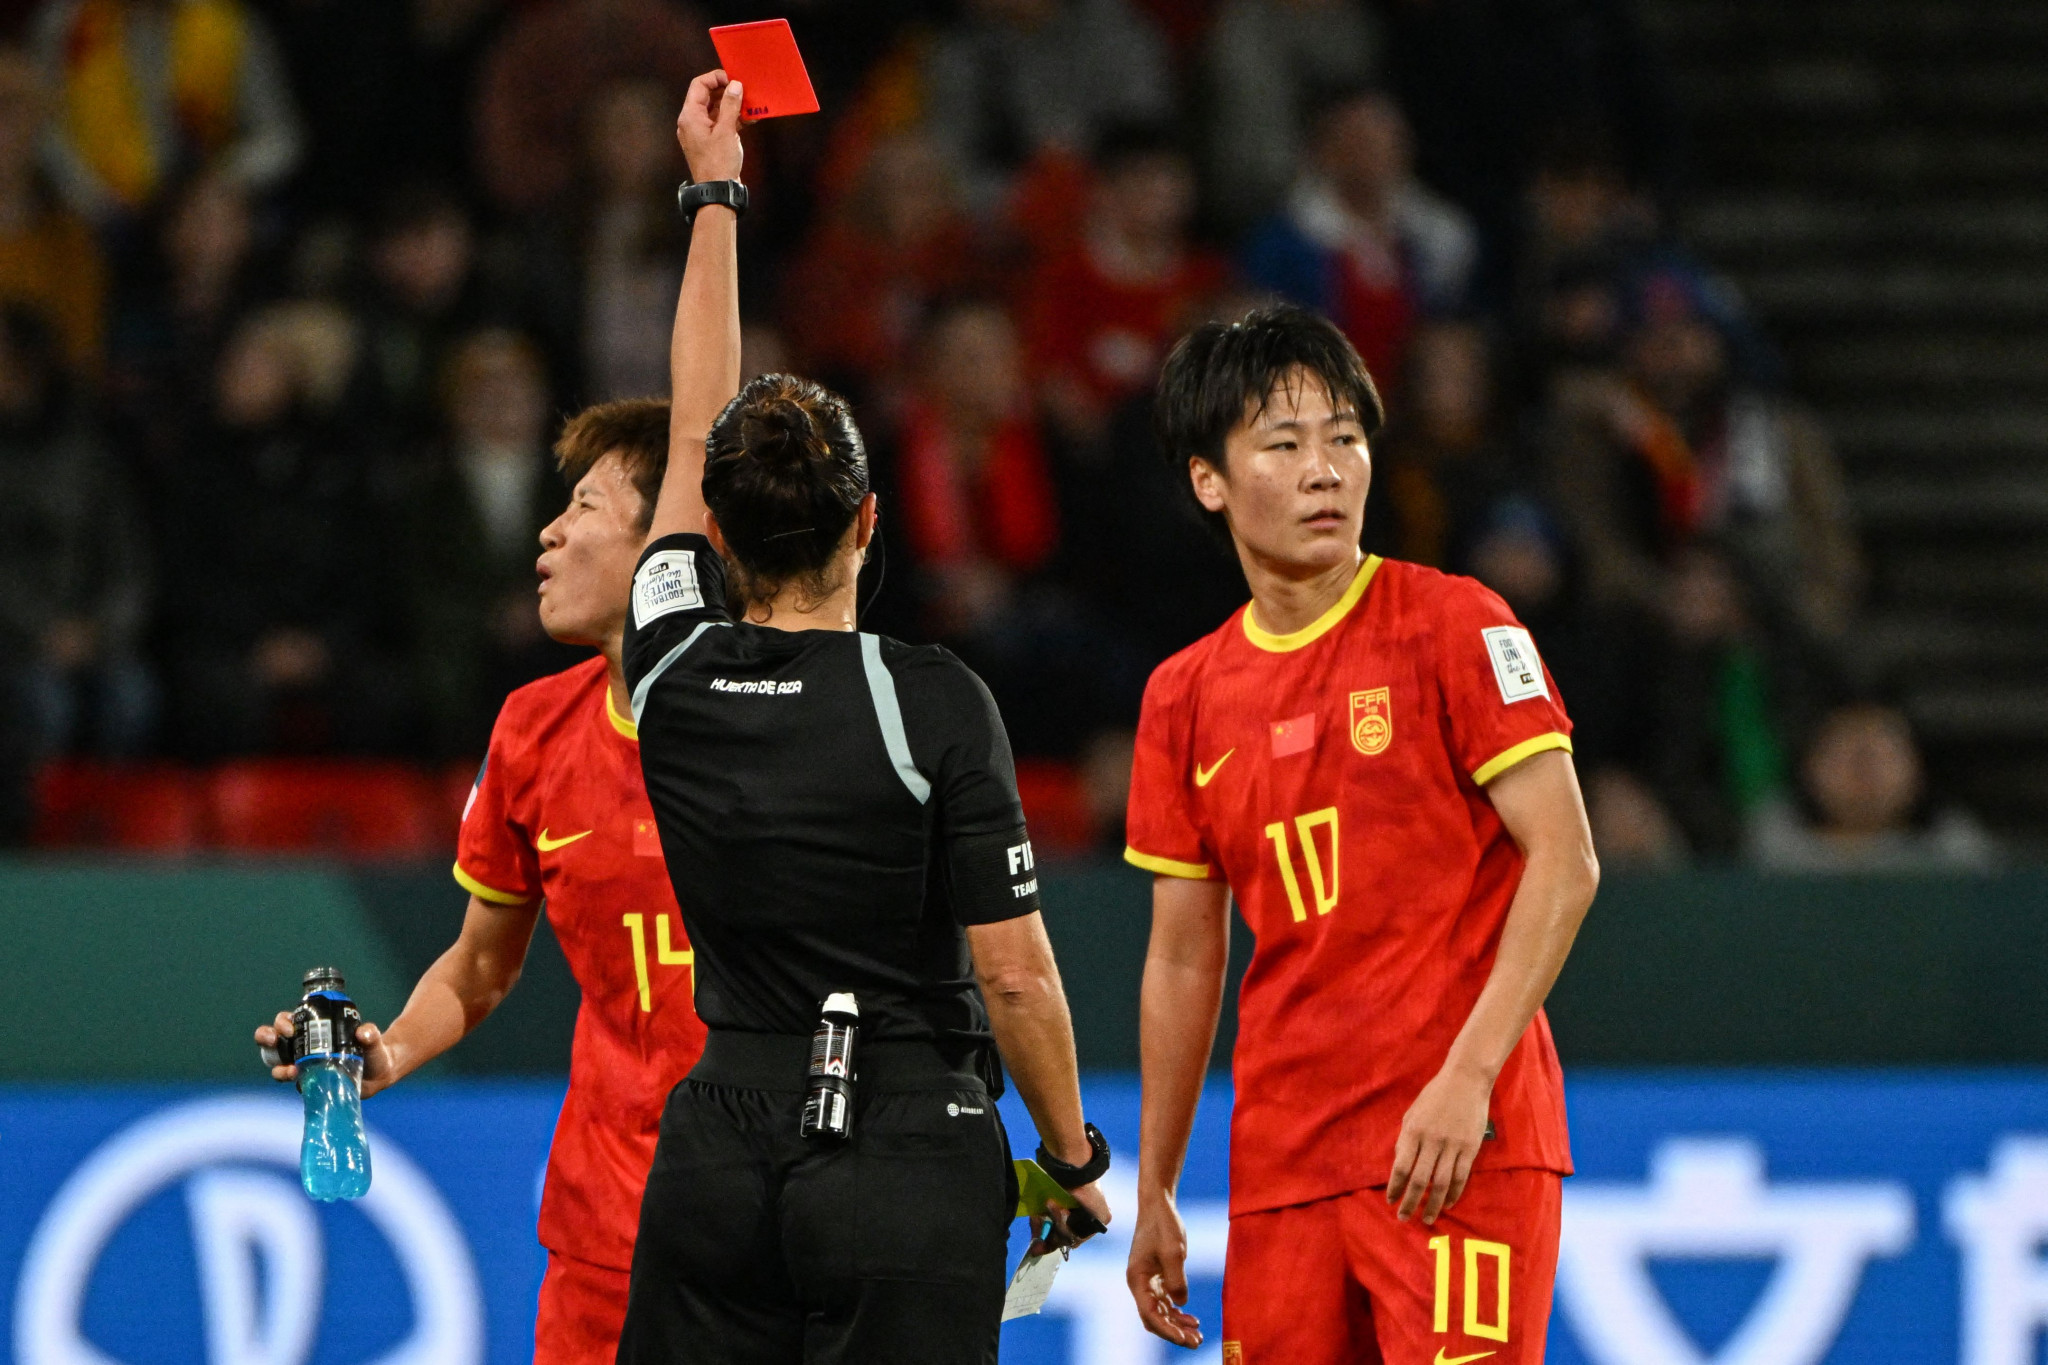 China's Zhang Rui, right, was sent off after 29 minutes for a knee-high challenge on Haiti's Sherly Jeudy ©Getty Images